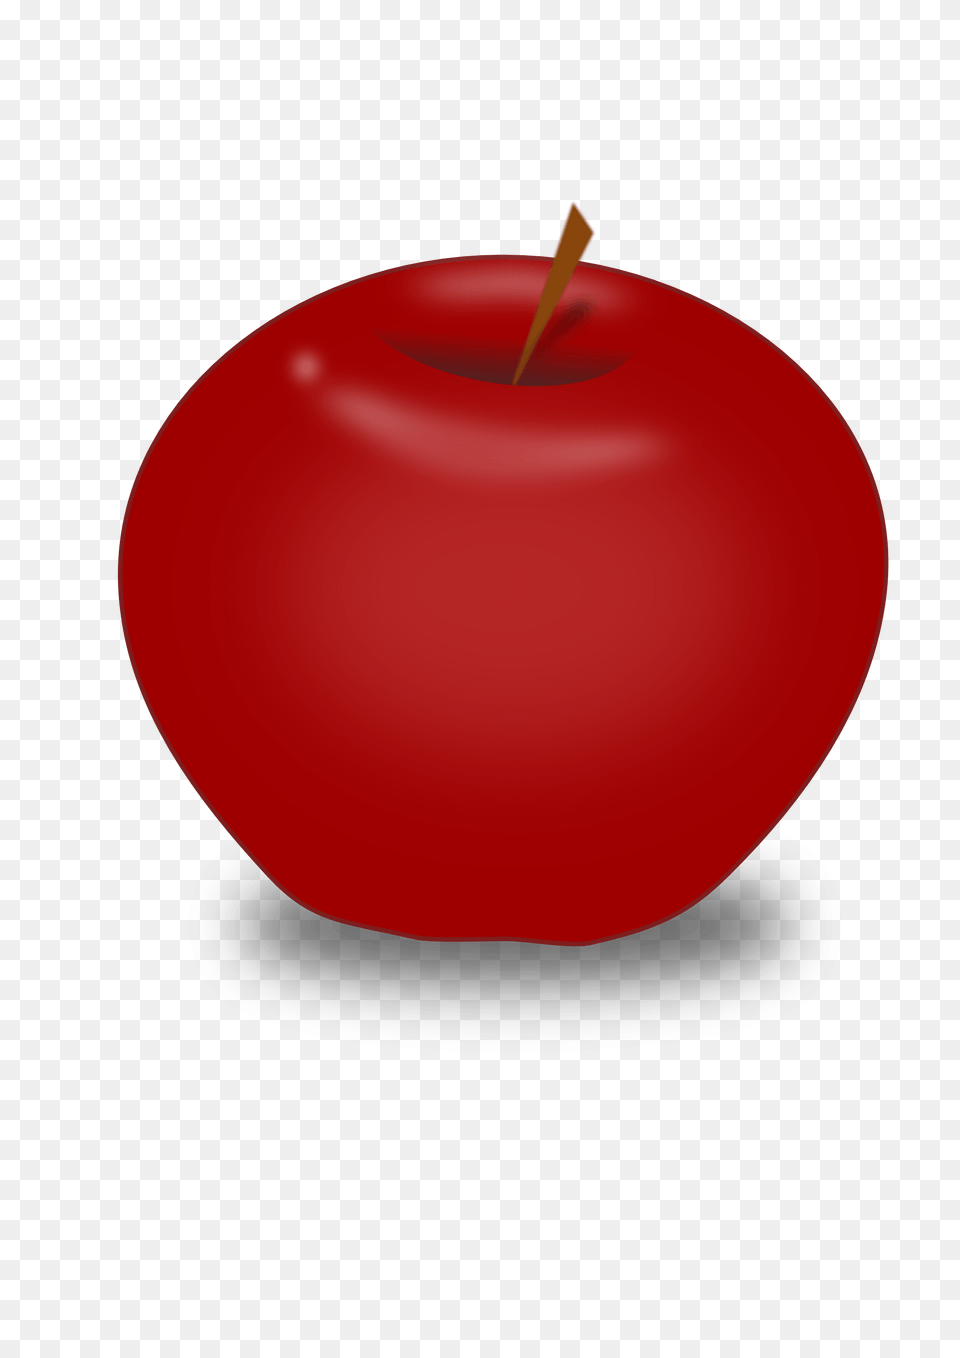 Apple, Food, Fruit, Plant, Produce Free Png Download